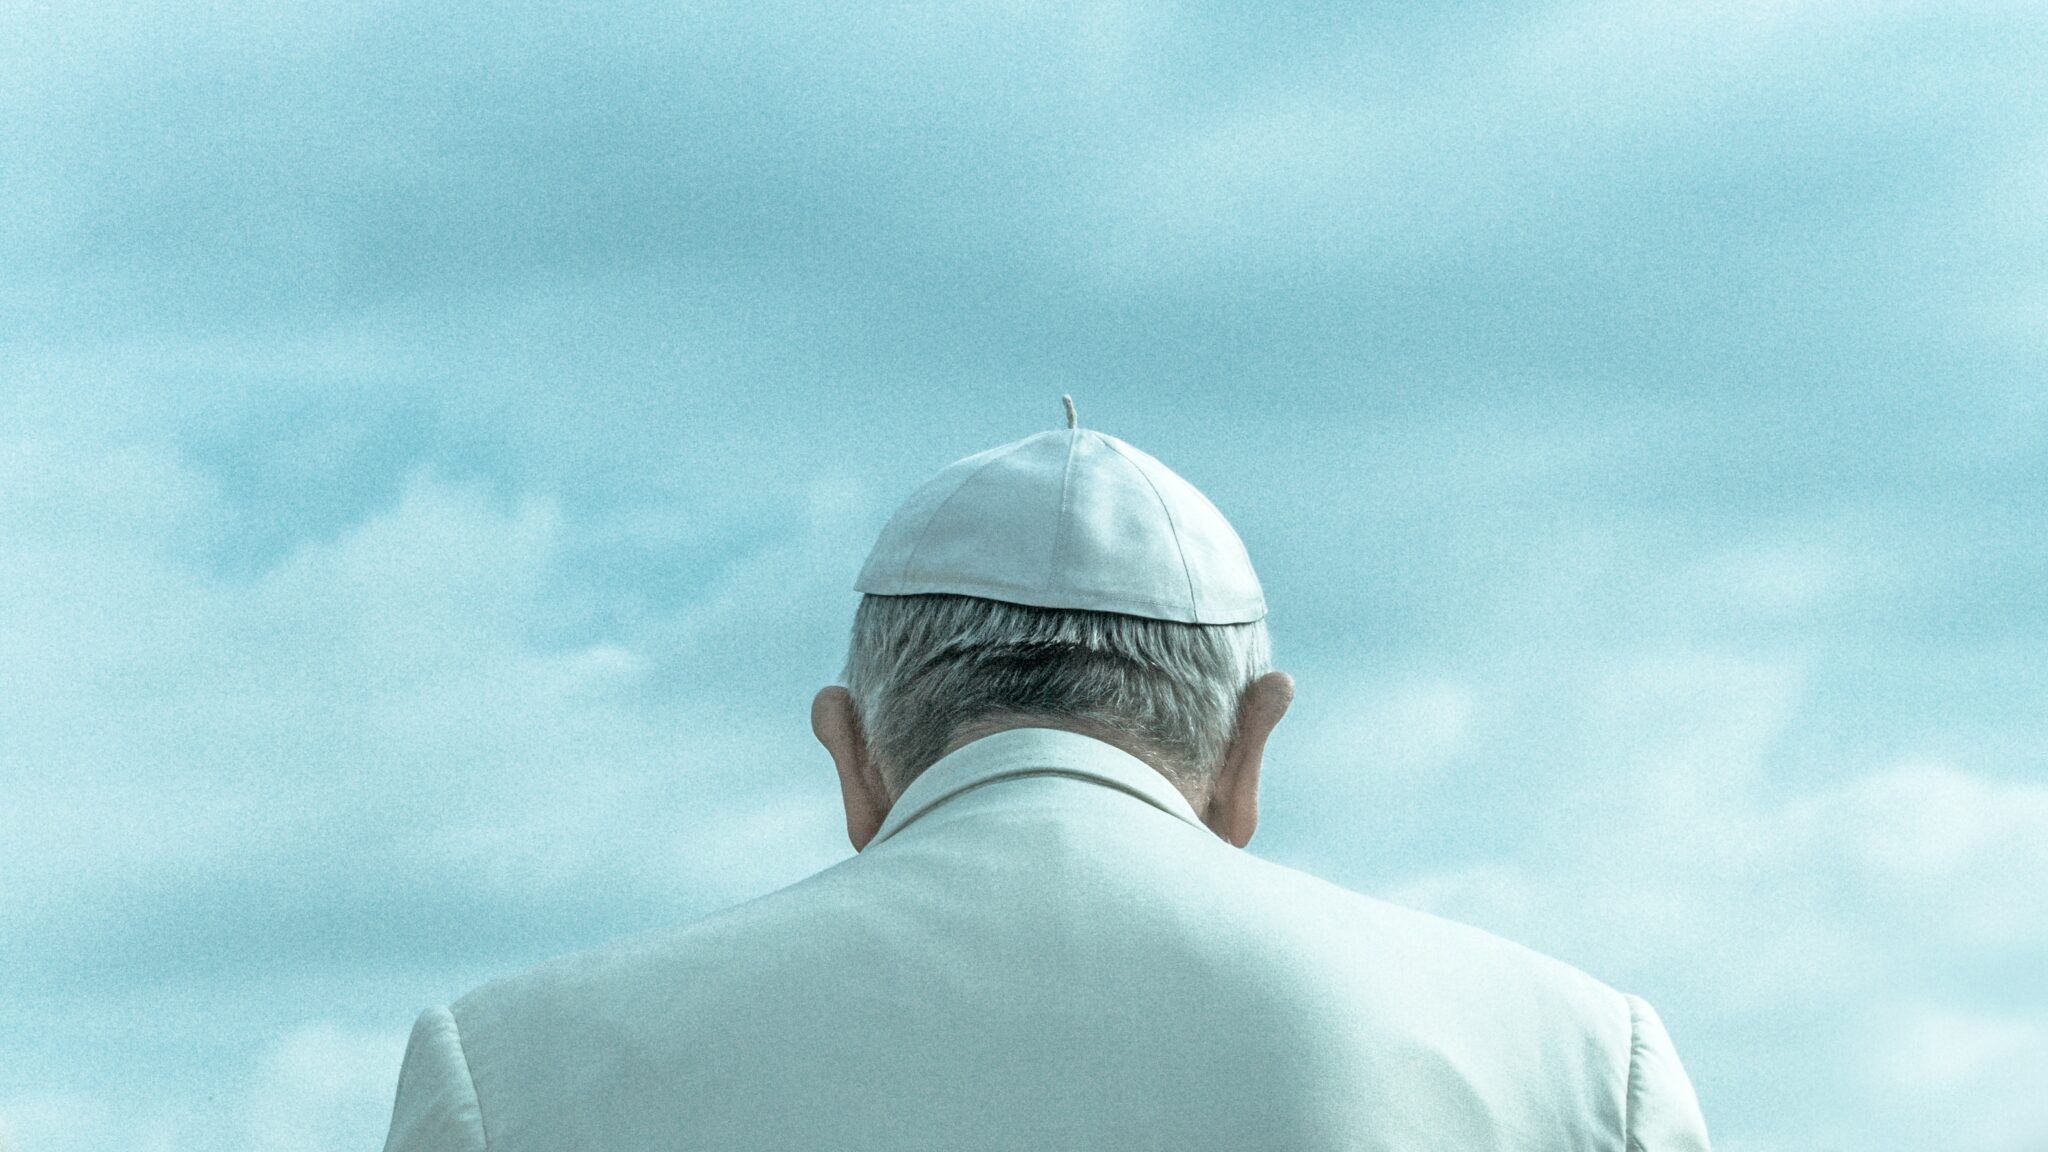 Picture of Pope Francis | Photo by Nacho Arteaga on Unsplash